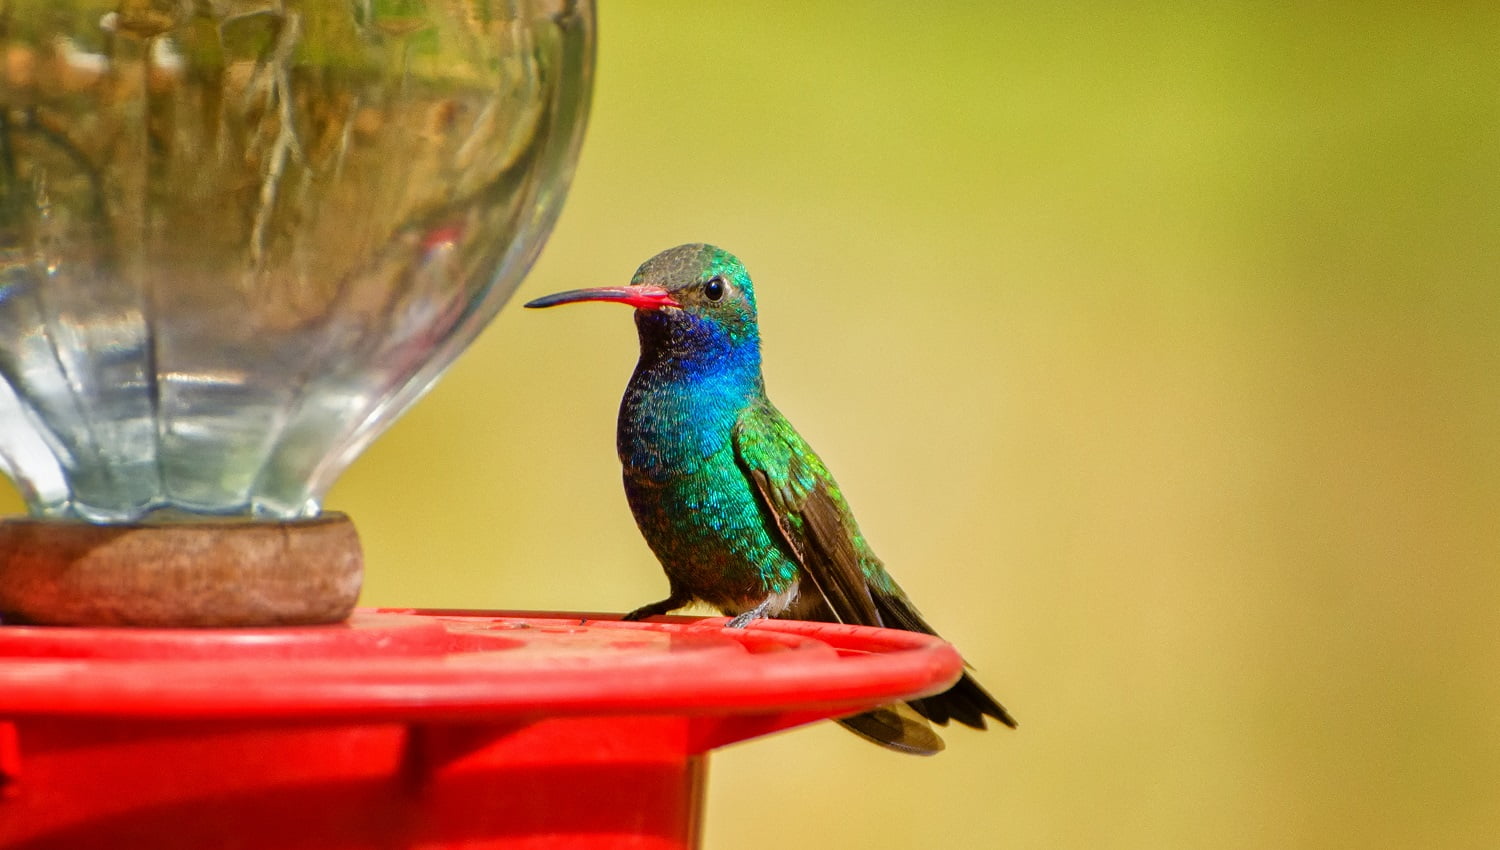 Broad-billed Hummingbird at a Feeder on a Yellow Background